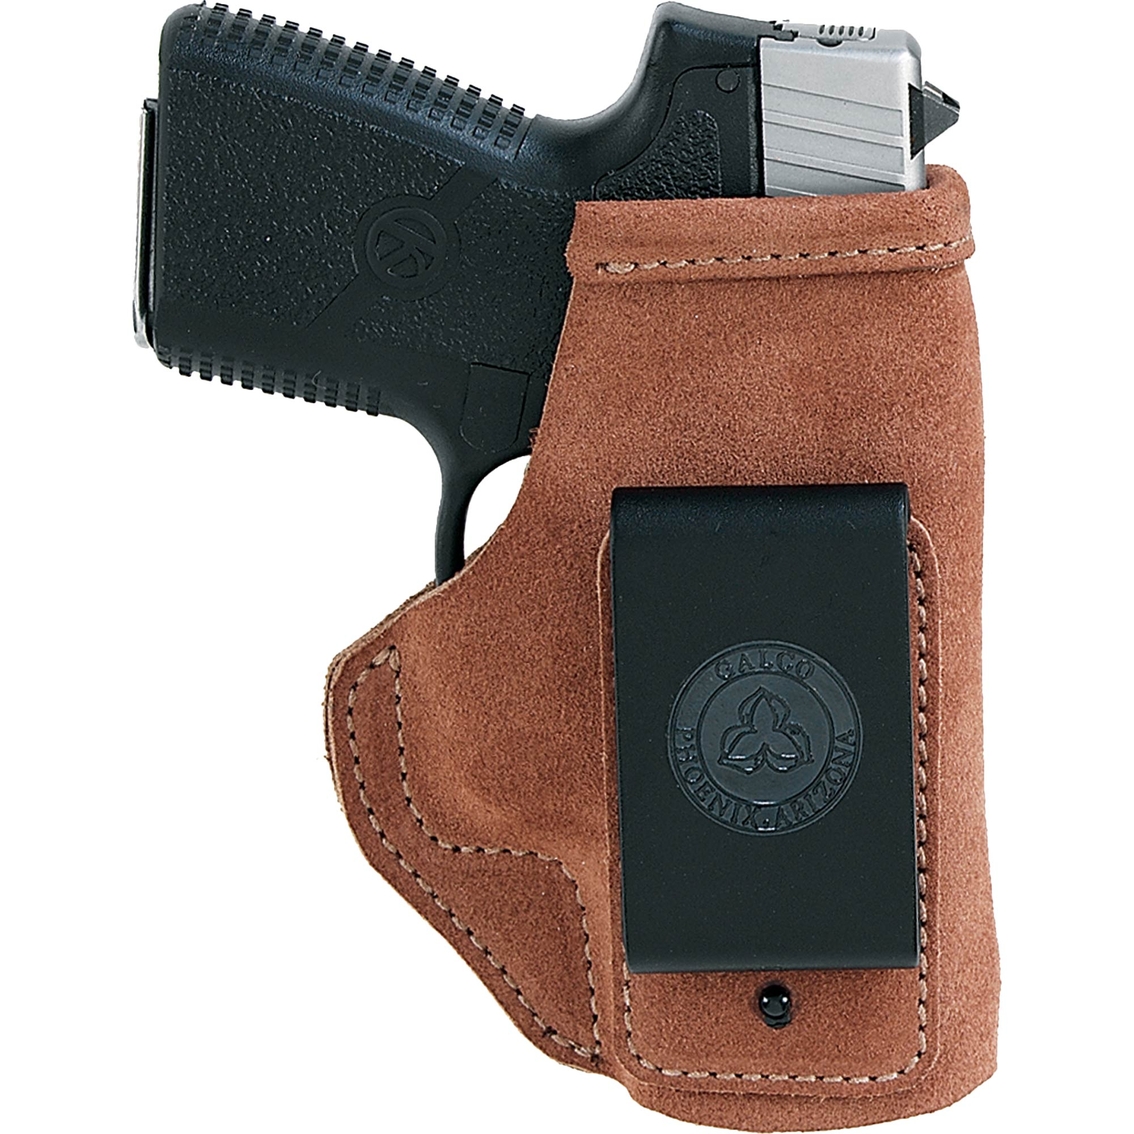 RIGHT HANDED Galco Inside Pant Holster fits Kahr CW40 CW9 K40 K9 P40 P45 P9 S9 